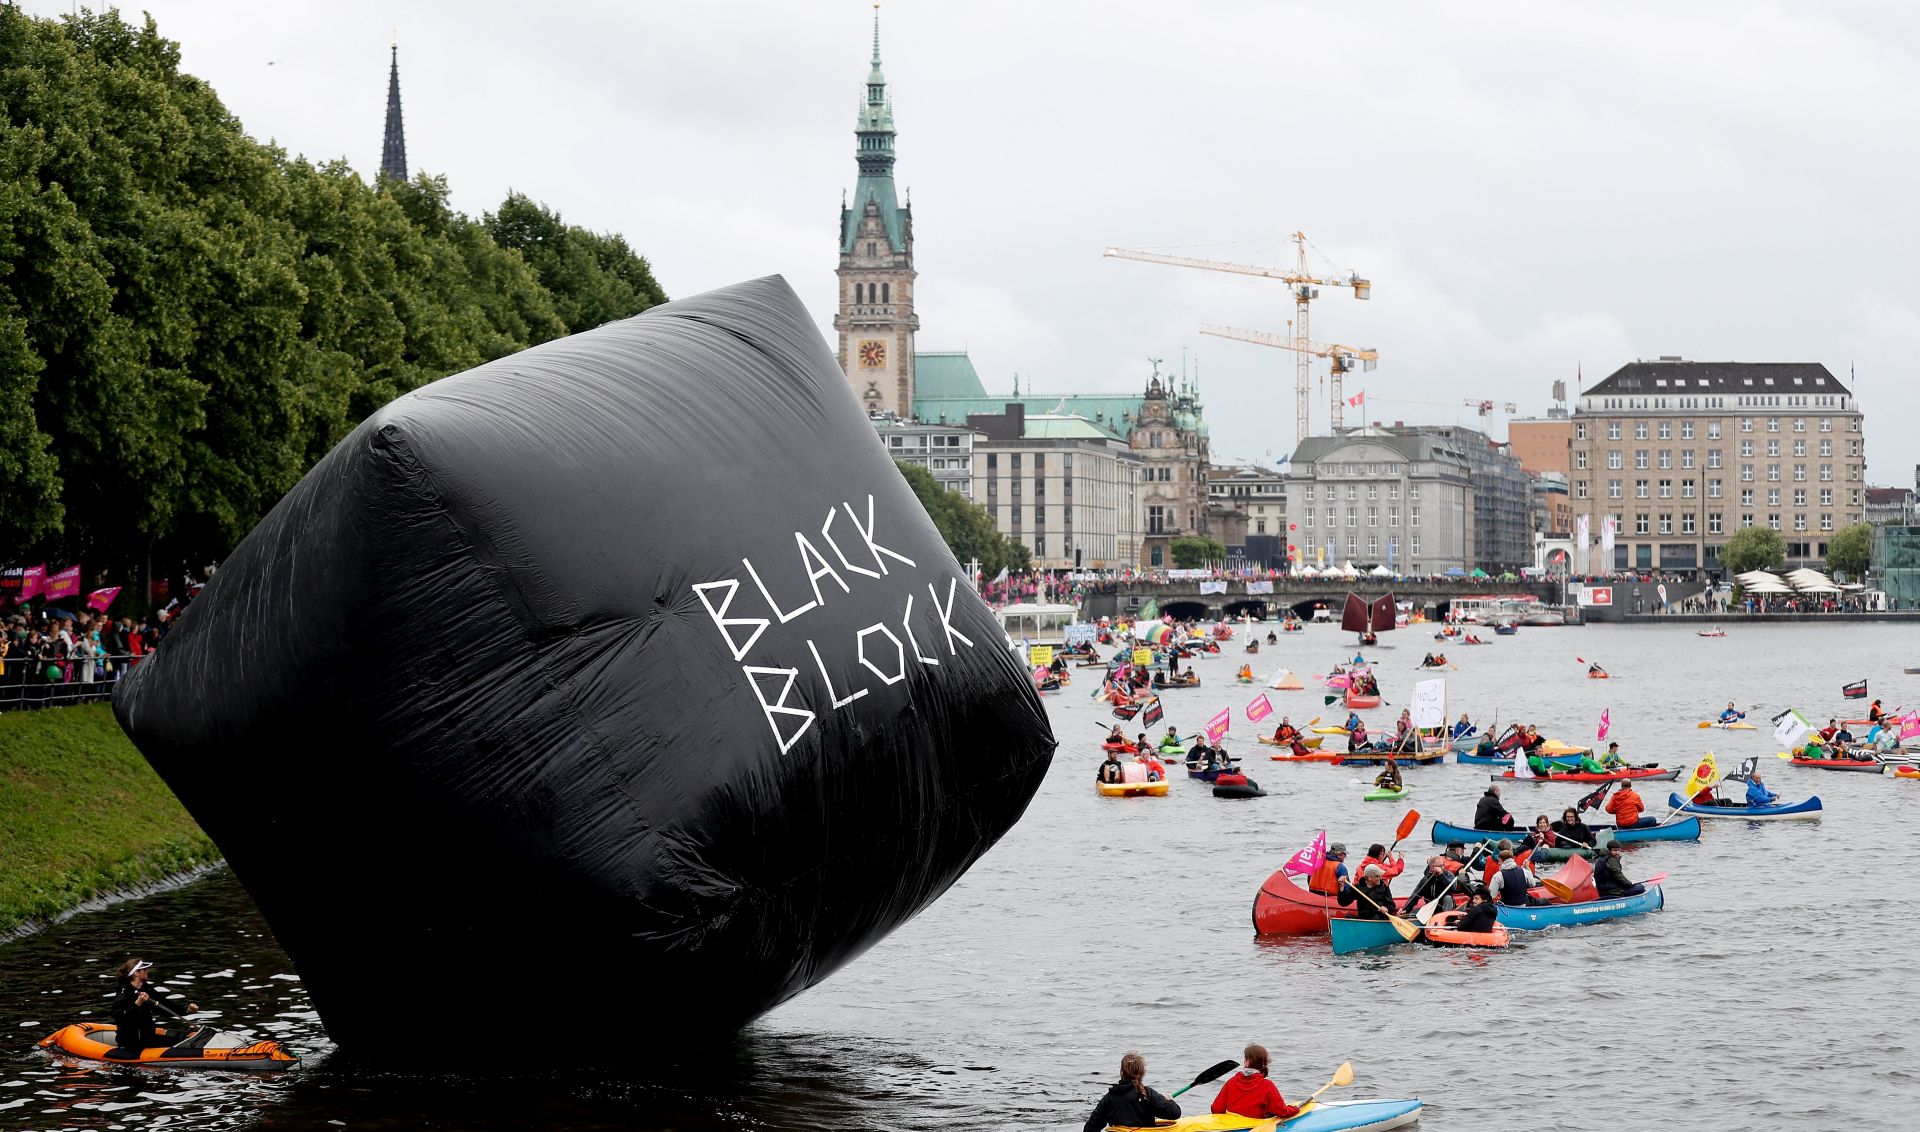 epa06061453 People in kayaks and small boats take part in a protest against the G20 summit in Hamburg, northern Germany, 02 July 2017. The G20 Summit (or G-20 or Group of Twenty) is an international forum for governments from 20 major economies. The summit is taking place in Hamburg 07 to 08 July 2017.  EPA/FRIEDEMANN VOGEL